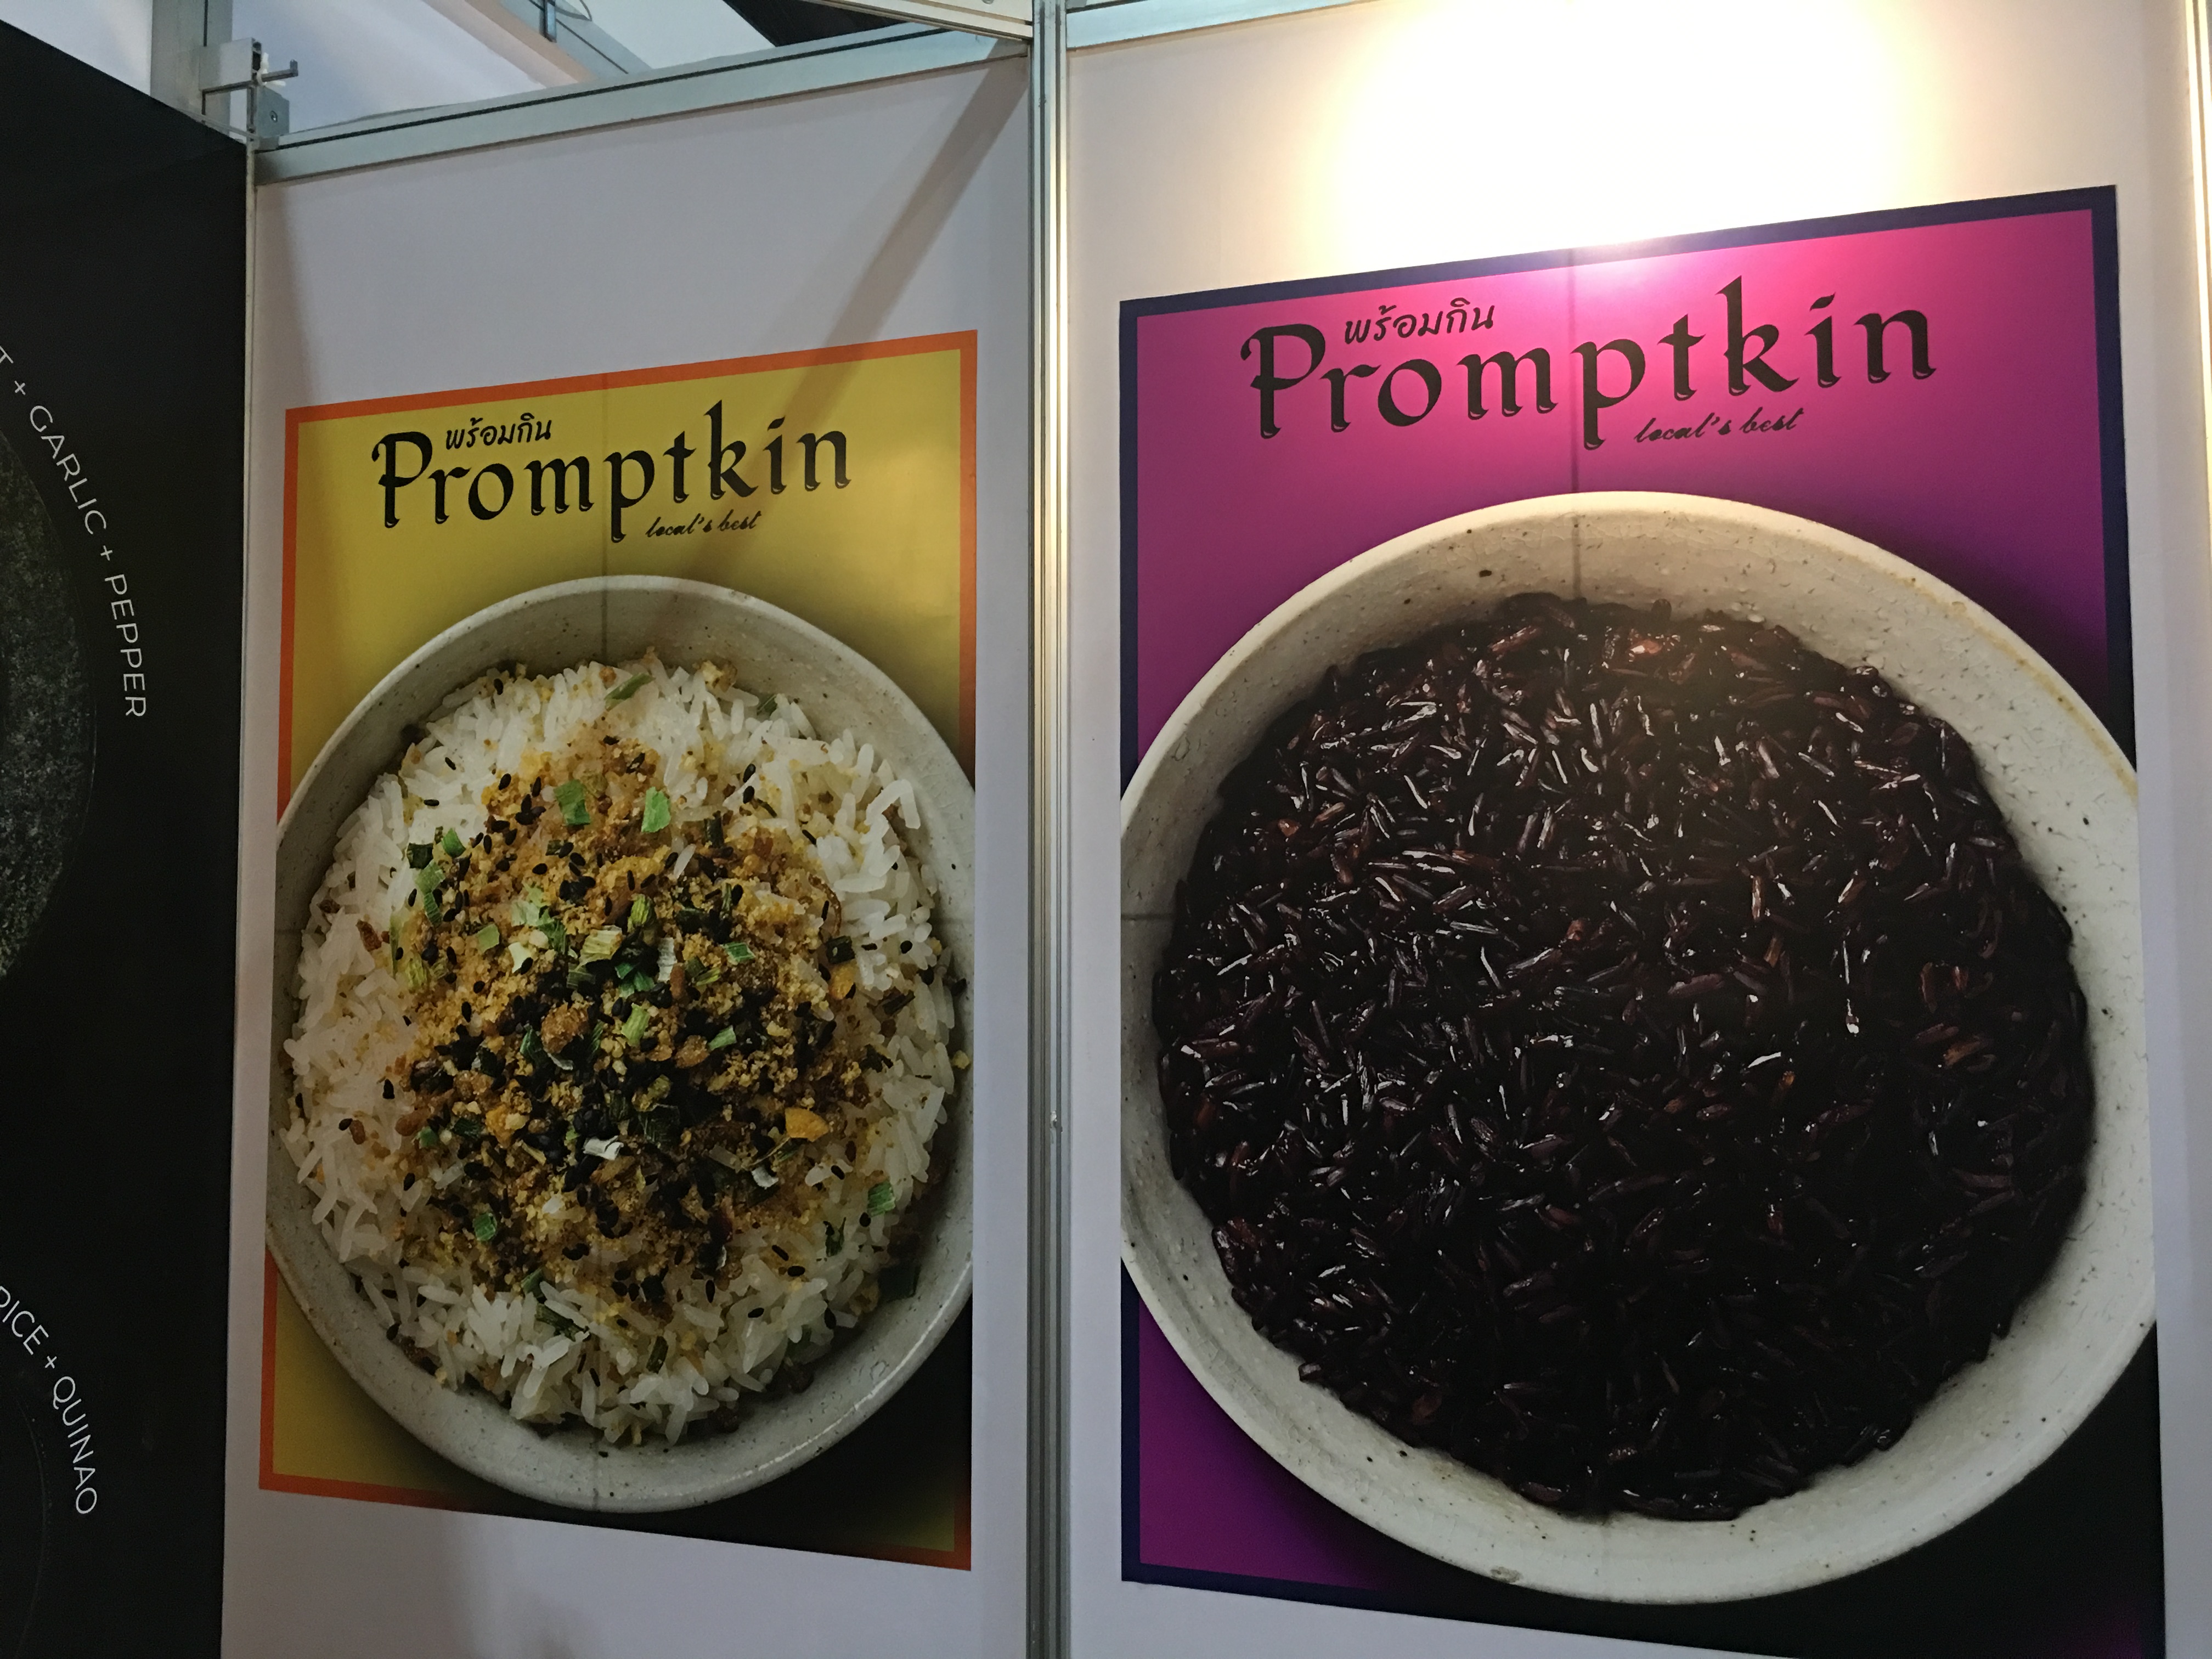 Booth display printing for food product startup © Pixel Planet Design